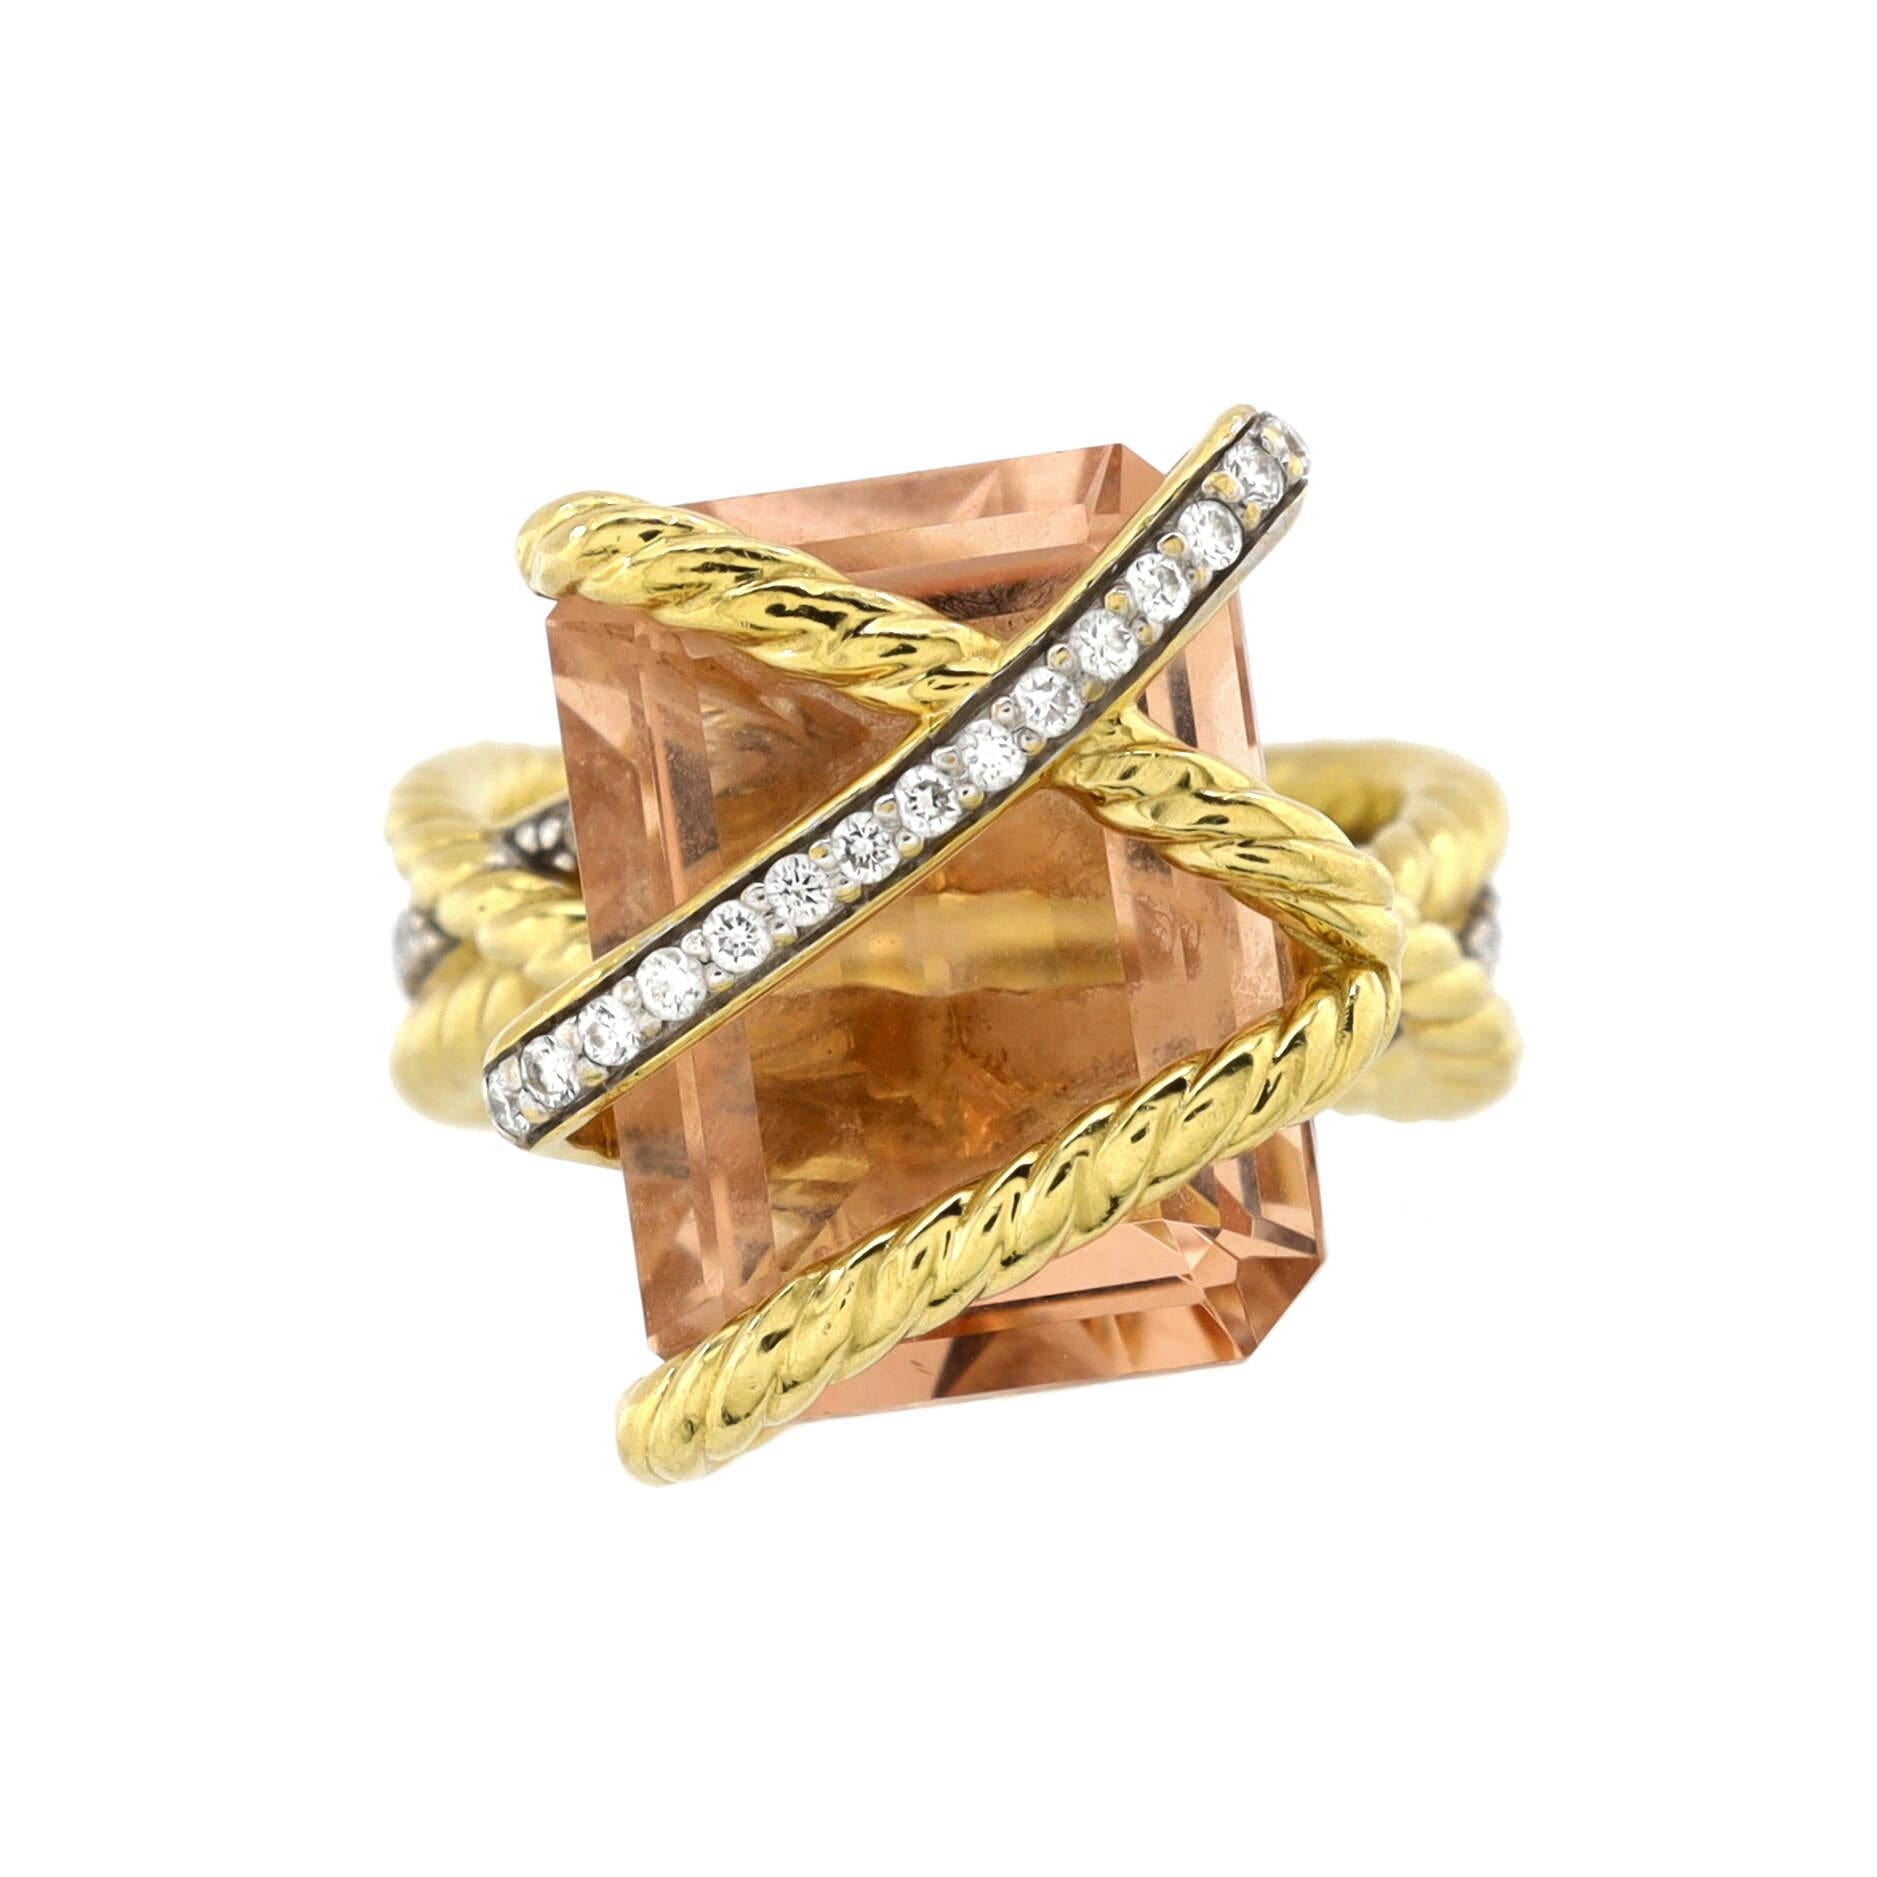 Condition: Very good. Moderate wear throughout.
Accessories: No Accessories
Measurements: Size: 5.25 - 50, Width: 6.80 mm
Designer: David Yurman
Model: Cable Wrap Ring 18K Yellow Gold with Morganite and Diamonds
Exterior Color: Yellow Gold
Item